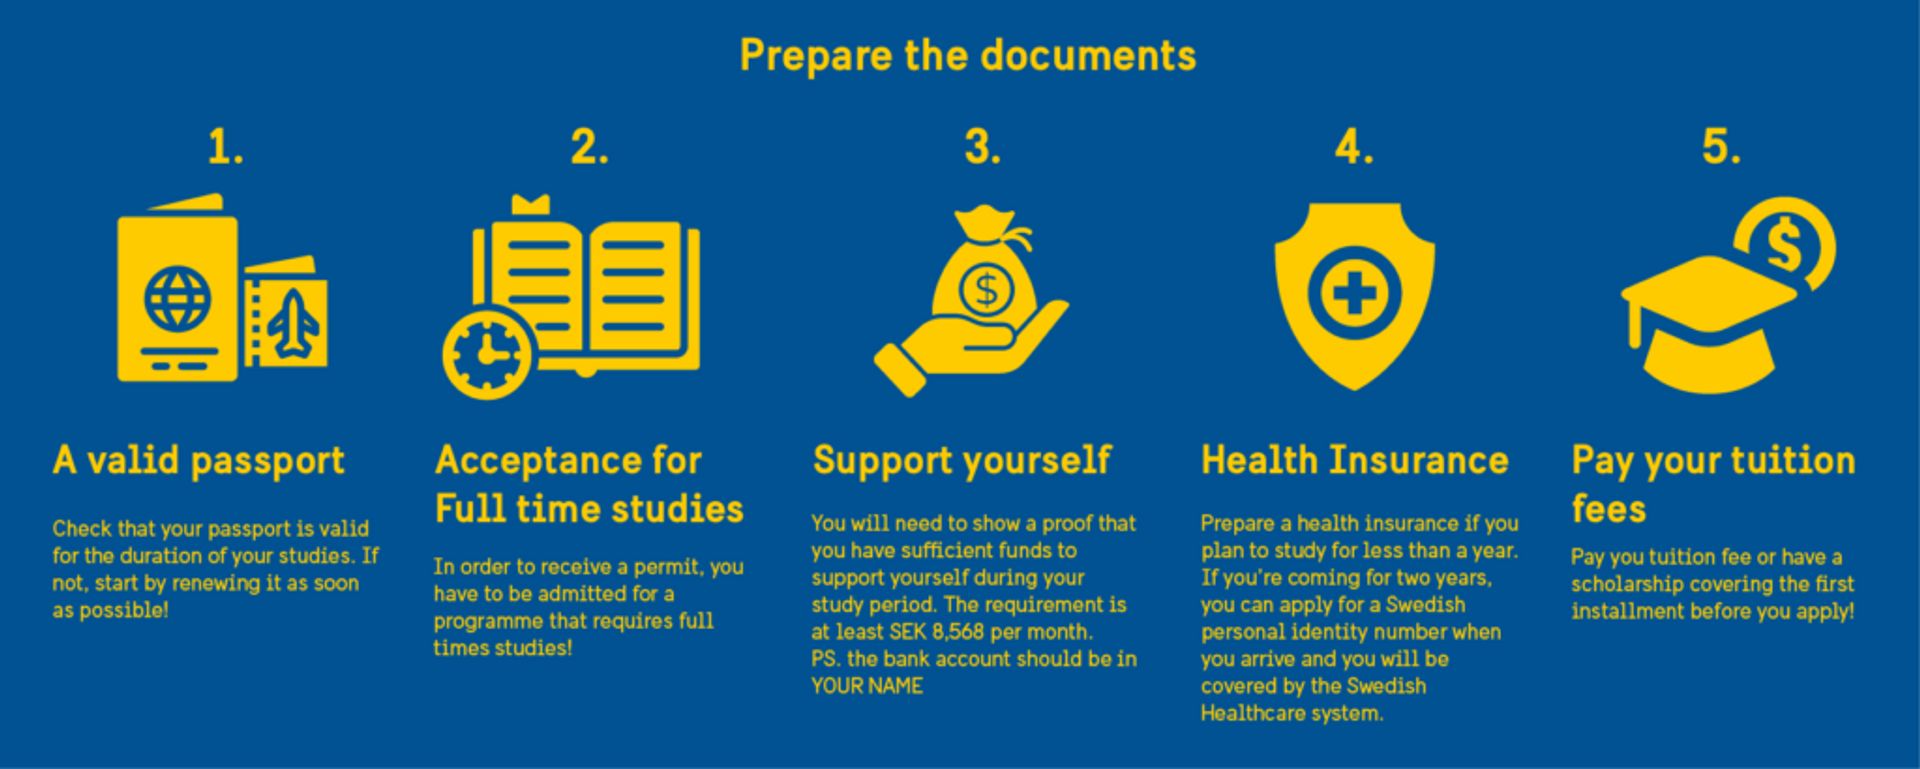 Illustration showing what's needed to apply for a residence permit: a valid passport, acceptance for full time studies, proof that you have sufficient funds, health insurance, and proof that you've paid your tuition fee.